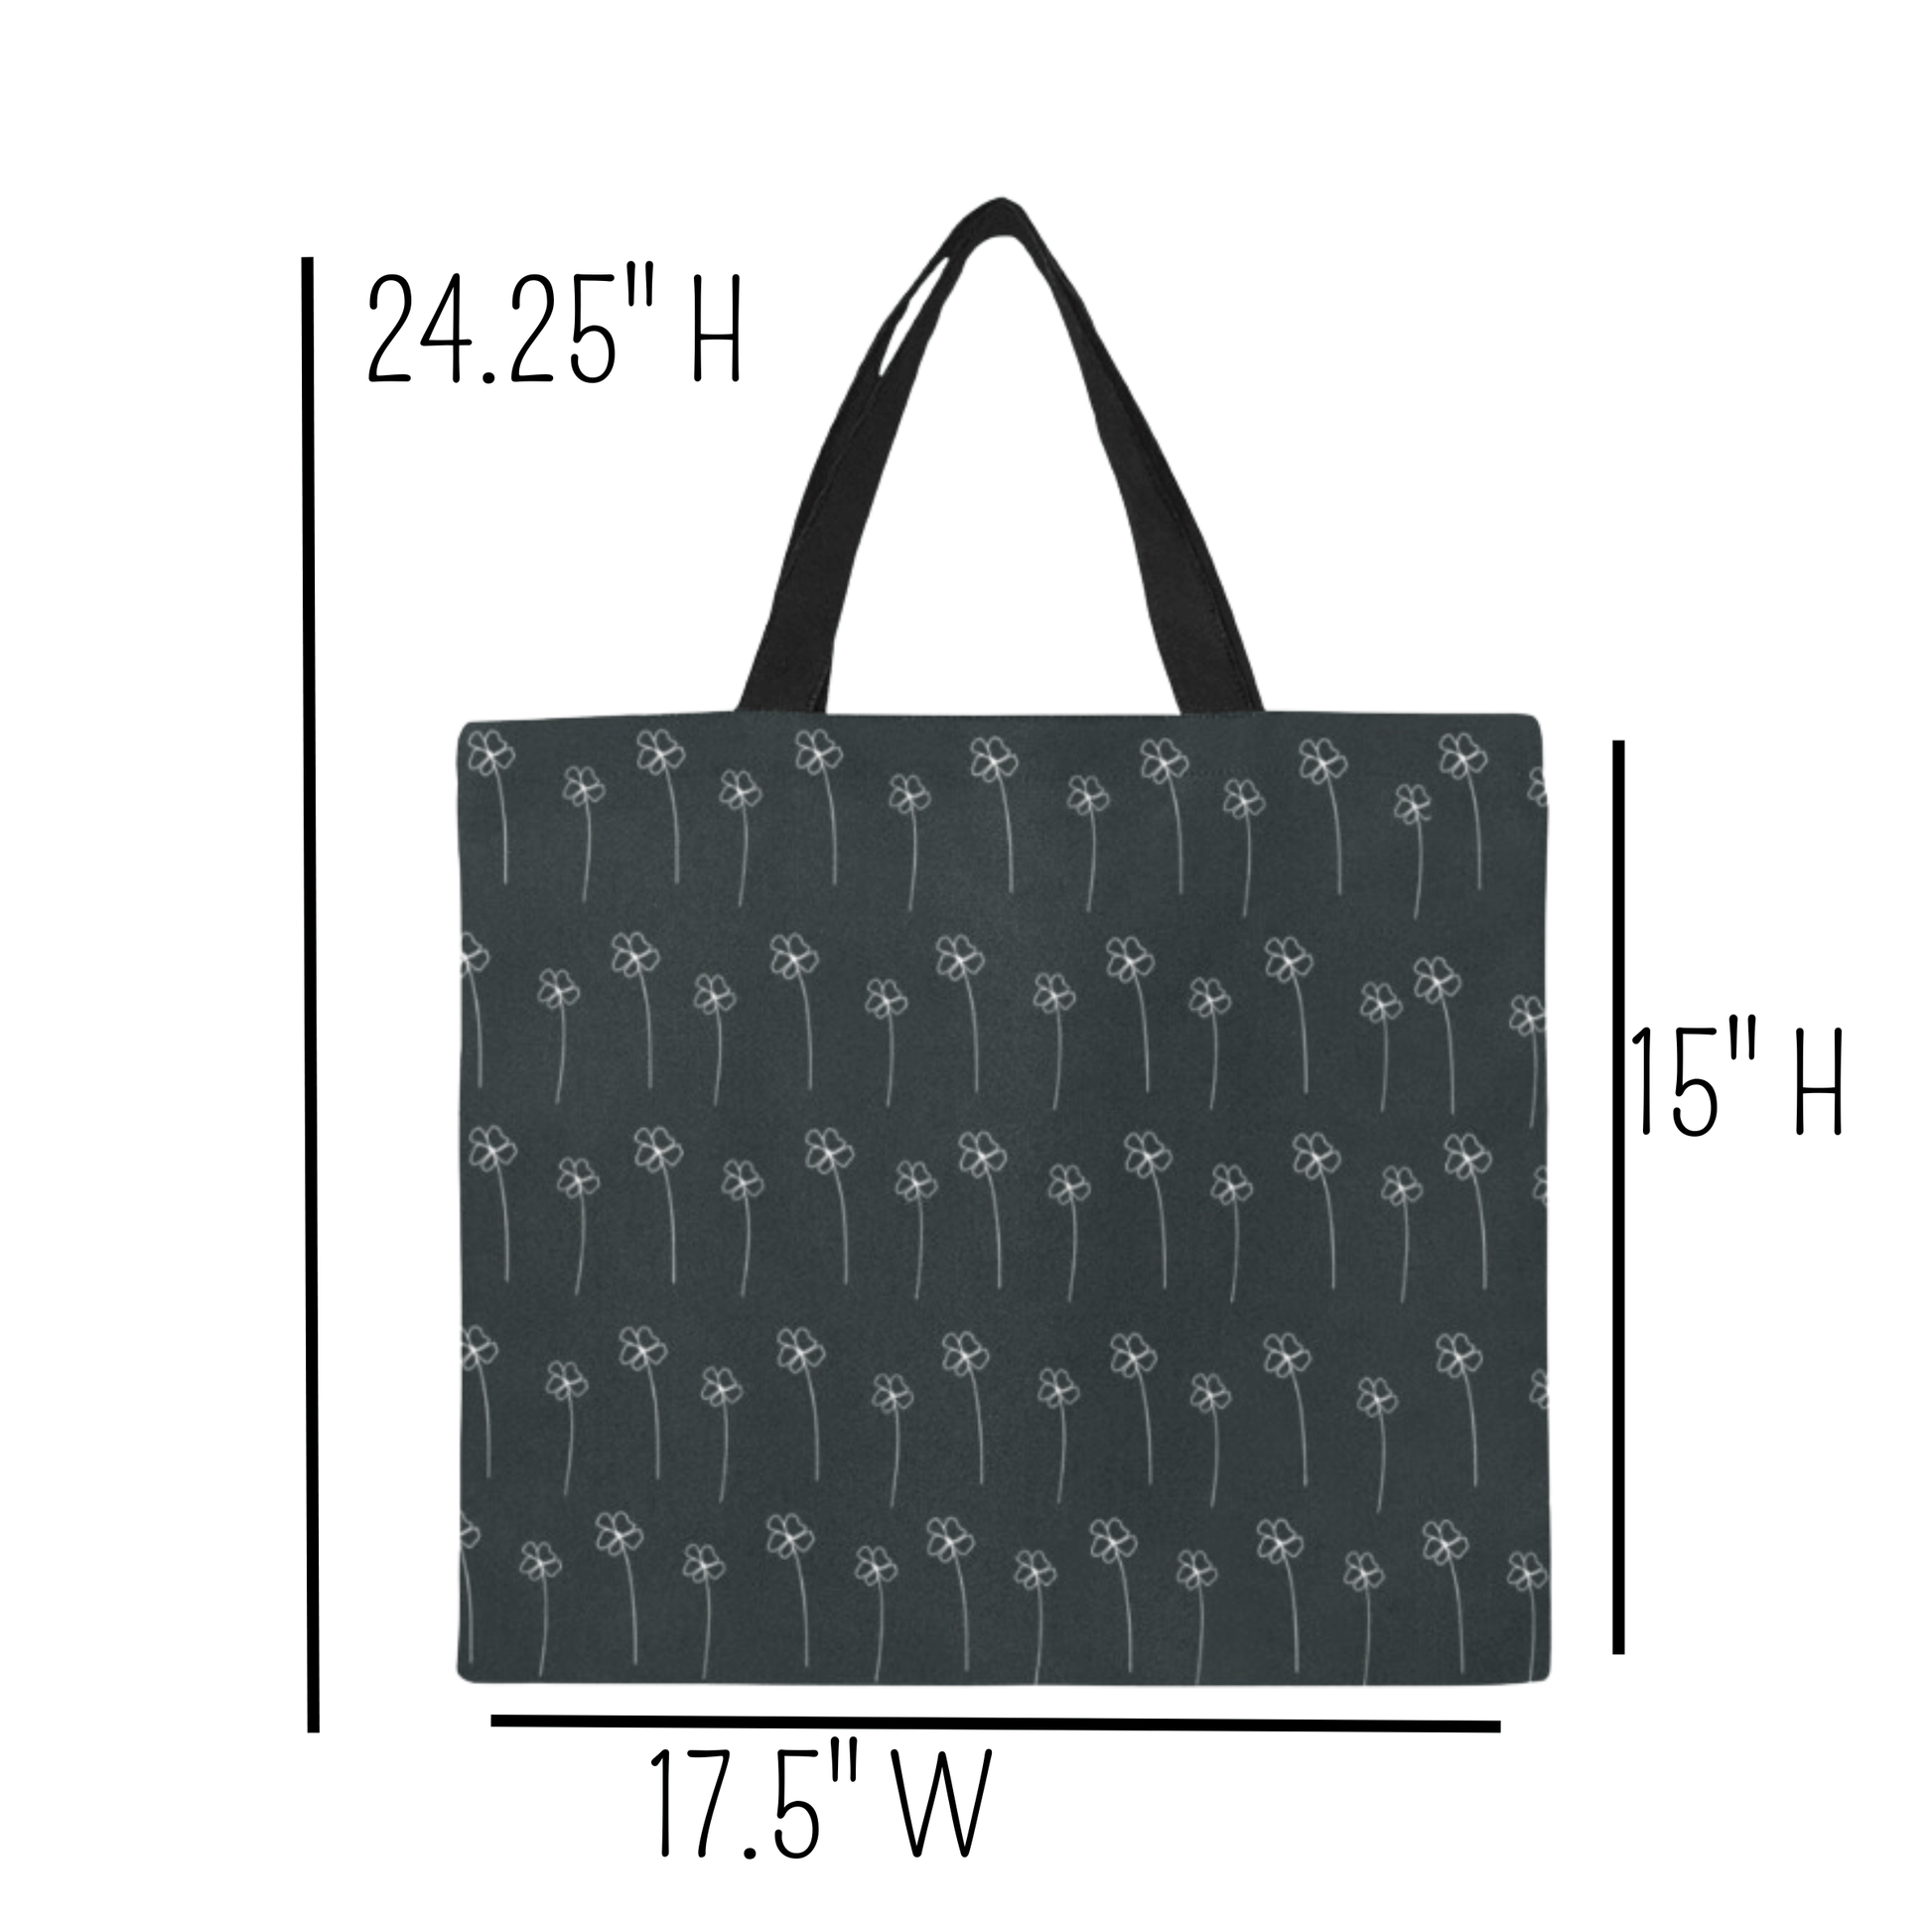 measurements of black tote bag are over seventeen inches wide, fifteen inch height and handles are over nine inches tall